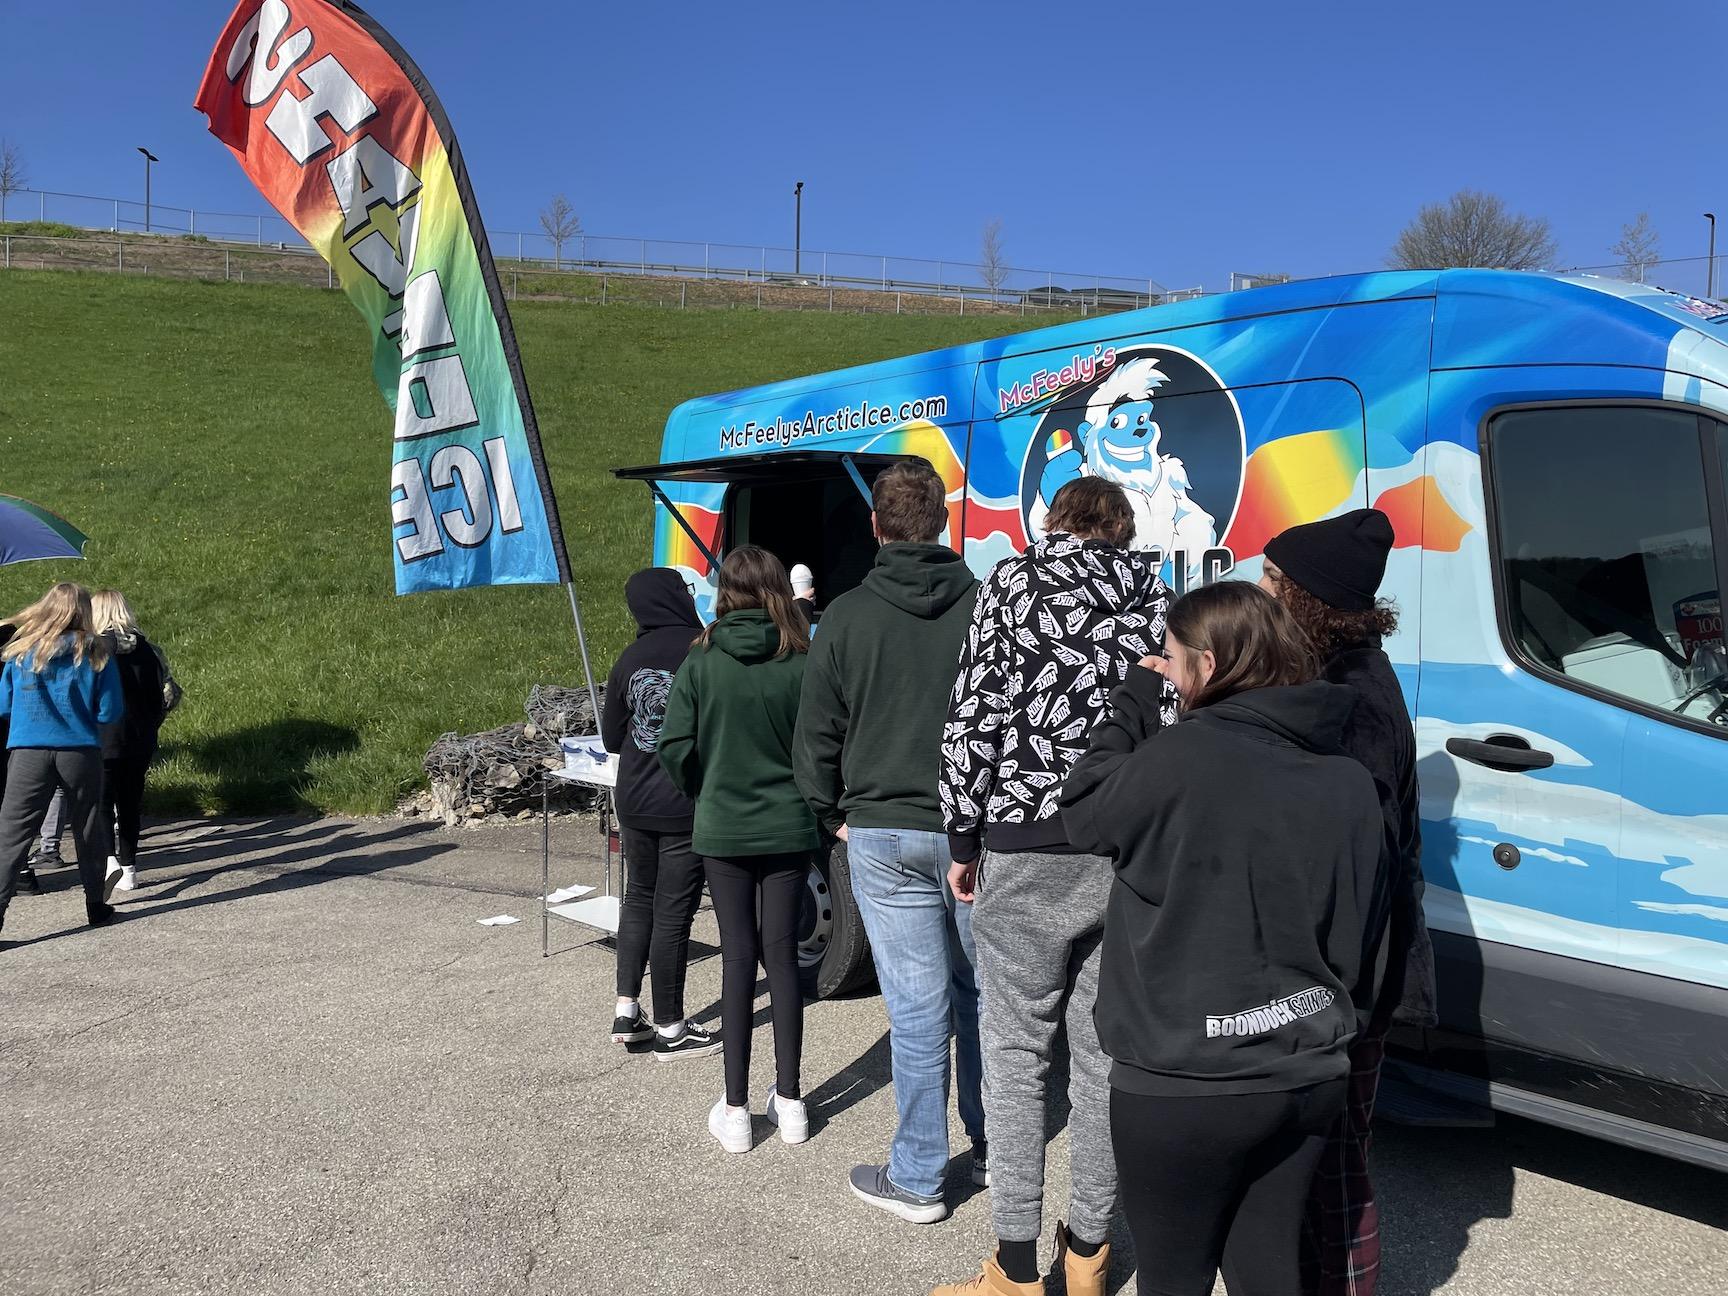 Students line up at McFeely’s Arctic Ice Truck